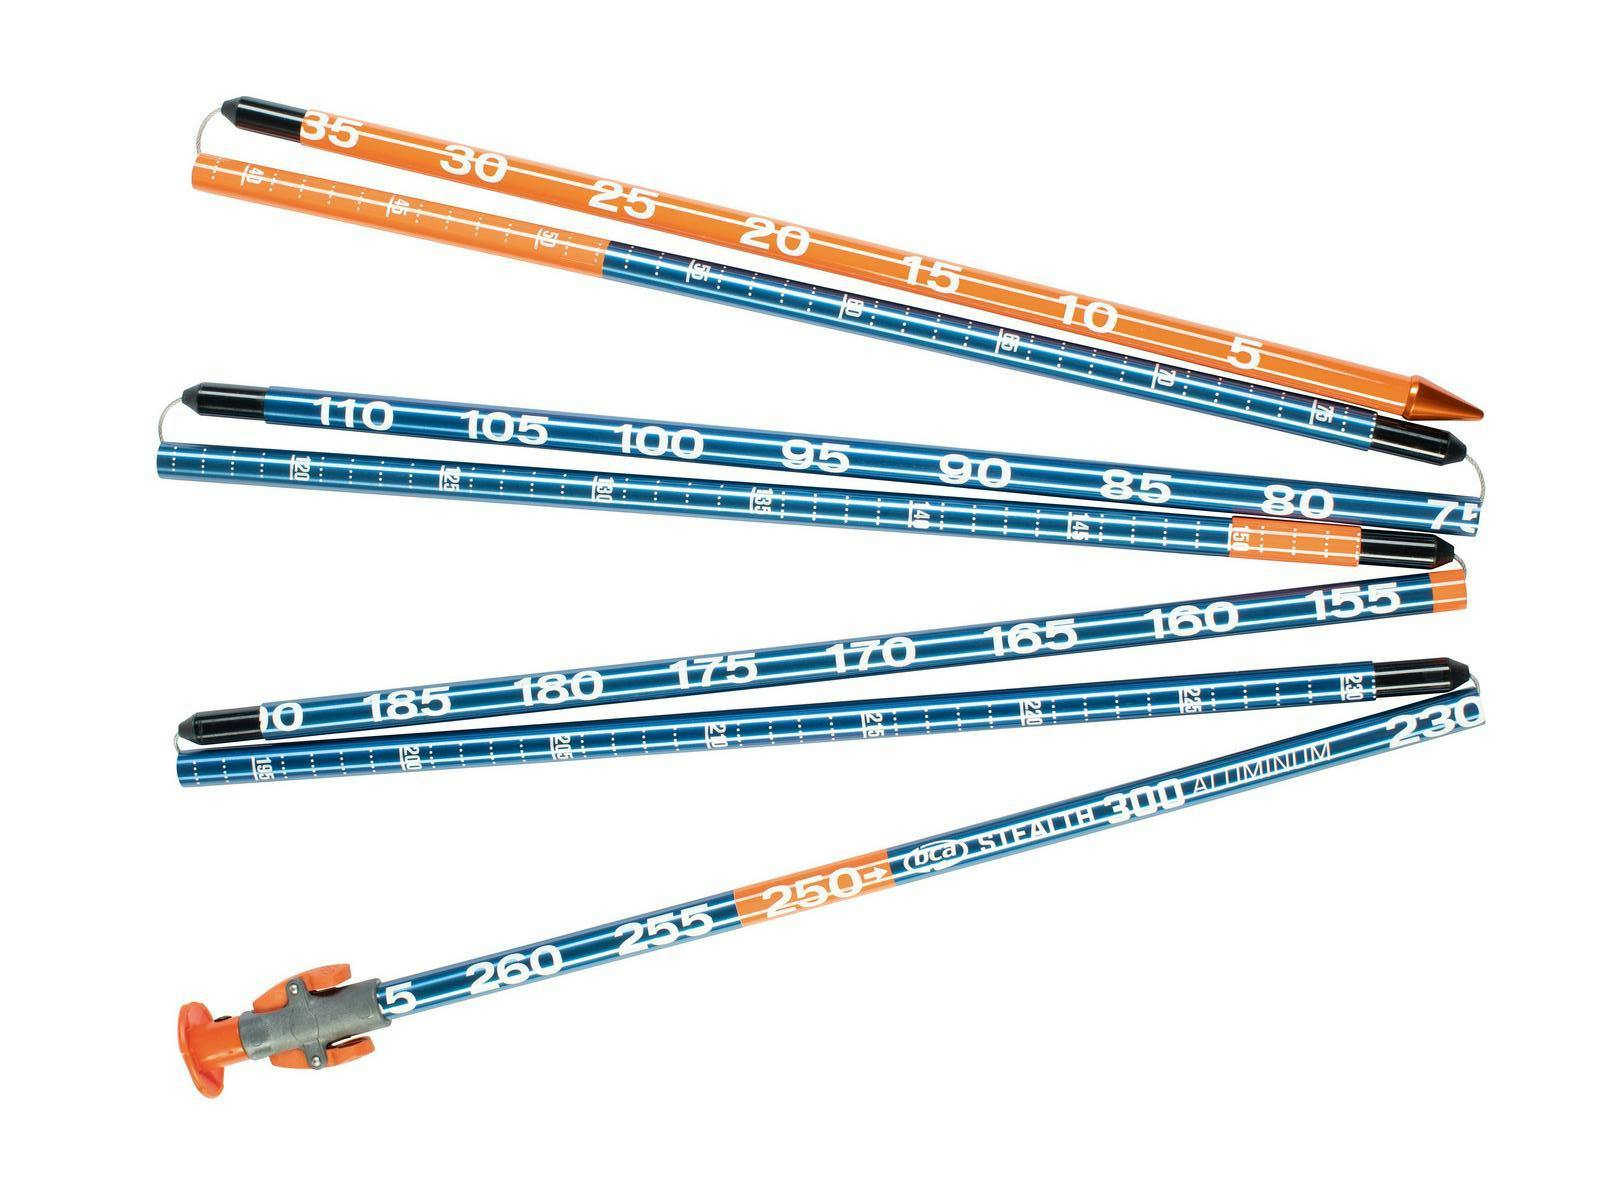 Product image of the Backcountry Access Stealth 270 Probes.